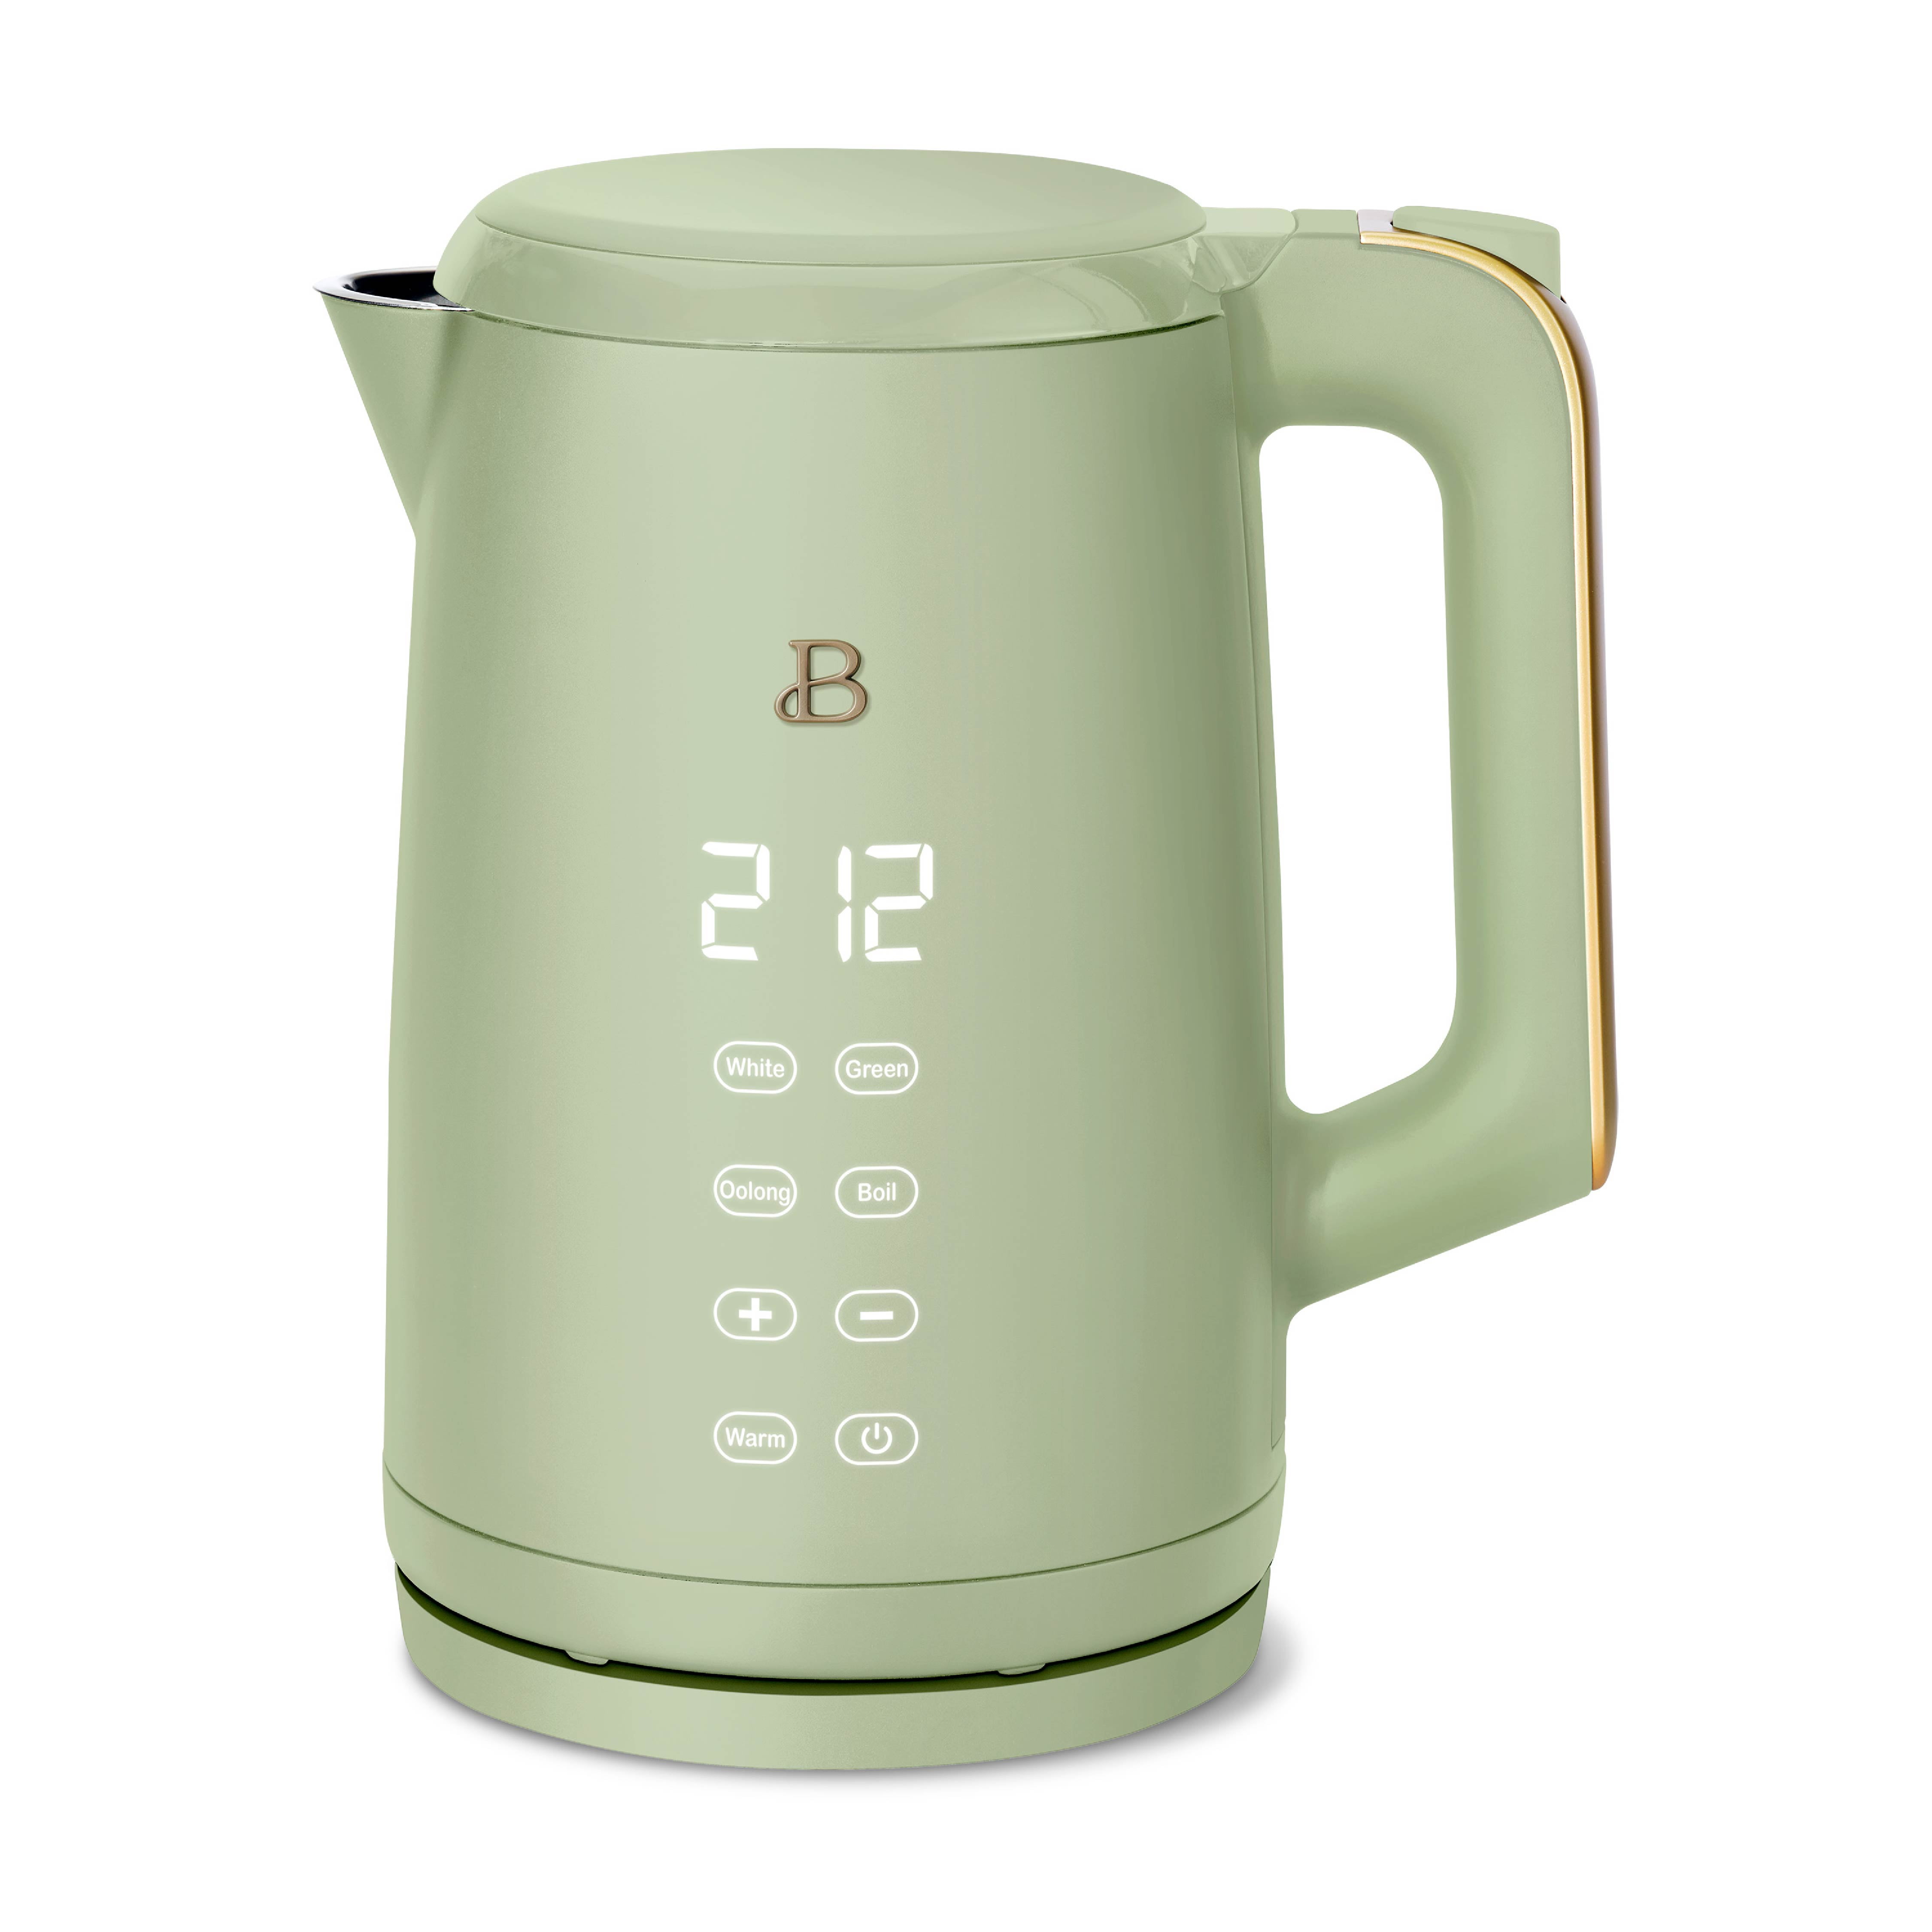 Beautiful 1.7 Liter One-Touch Electric Kettle, Sage Green by Drew Barrymore